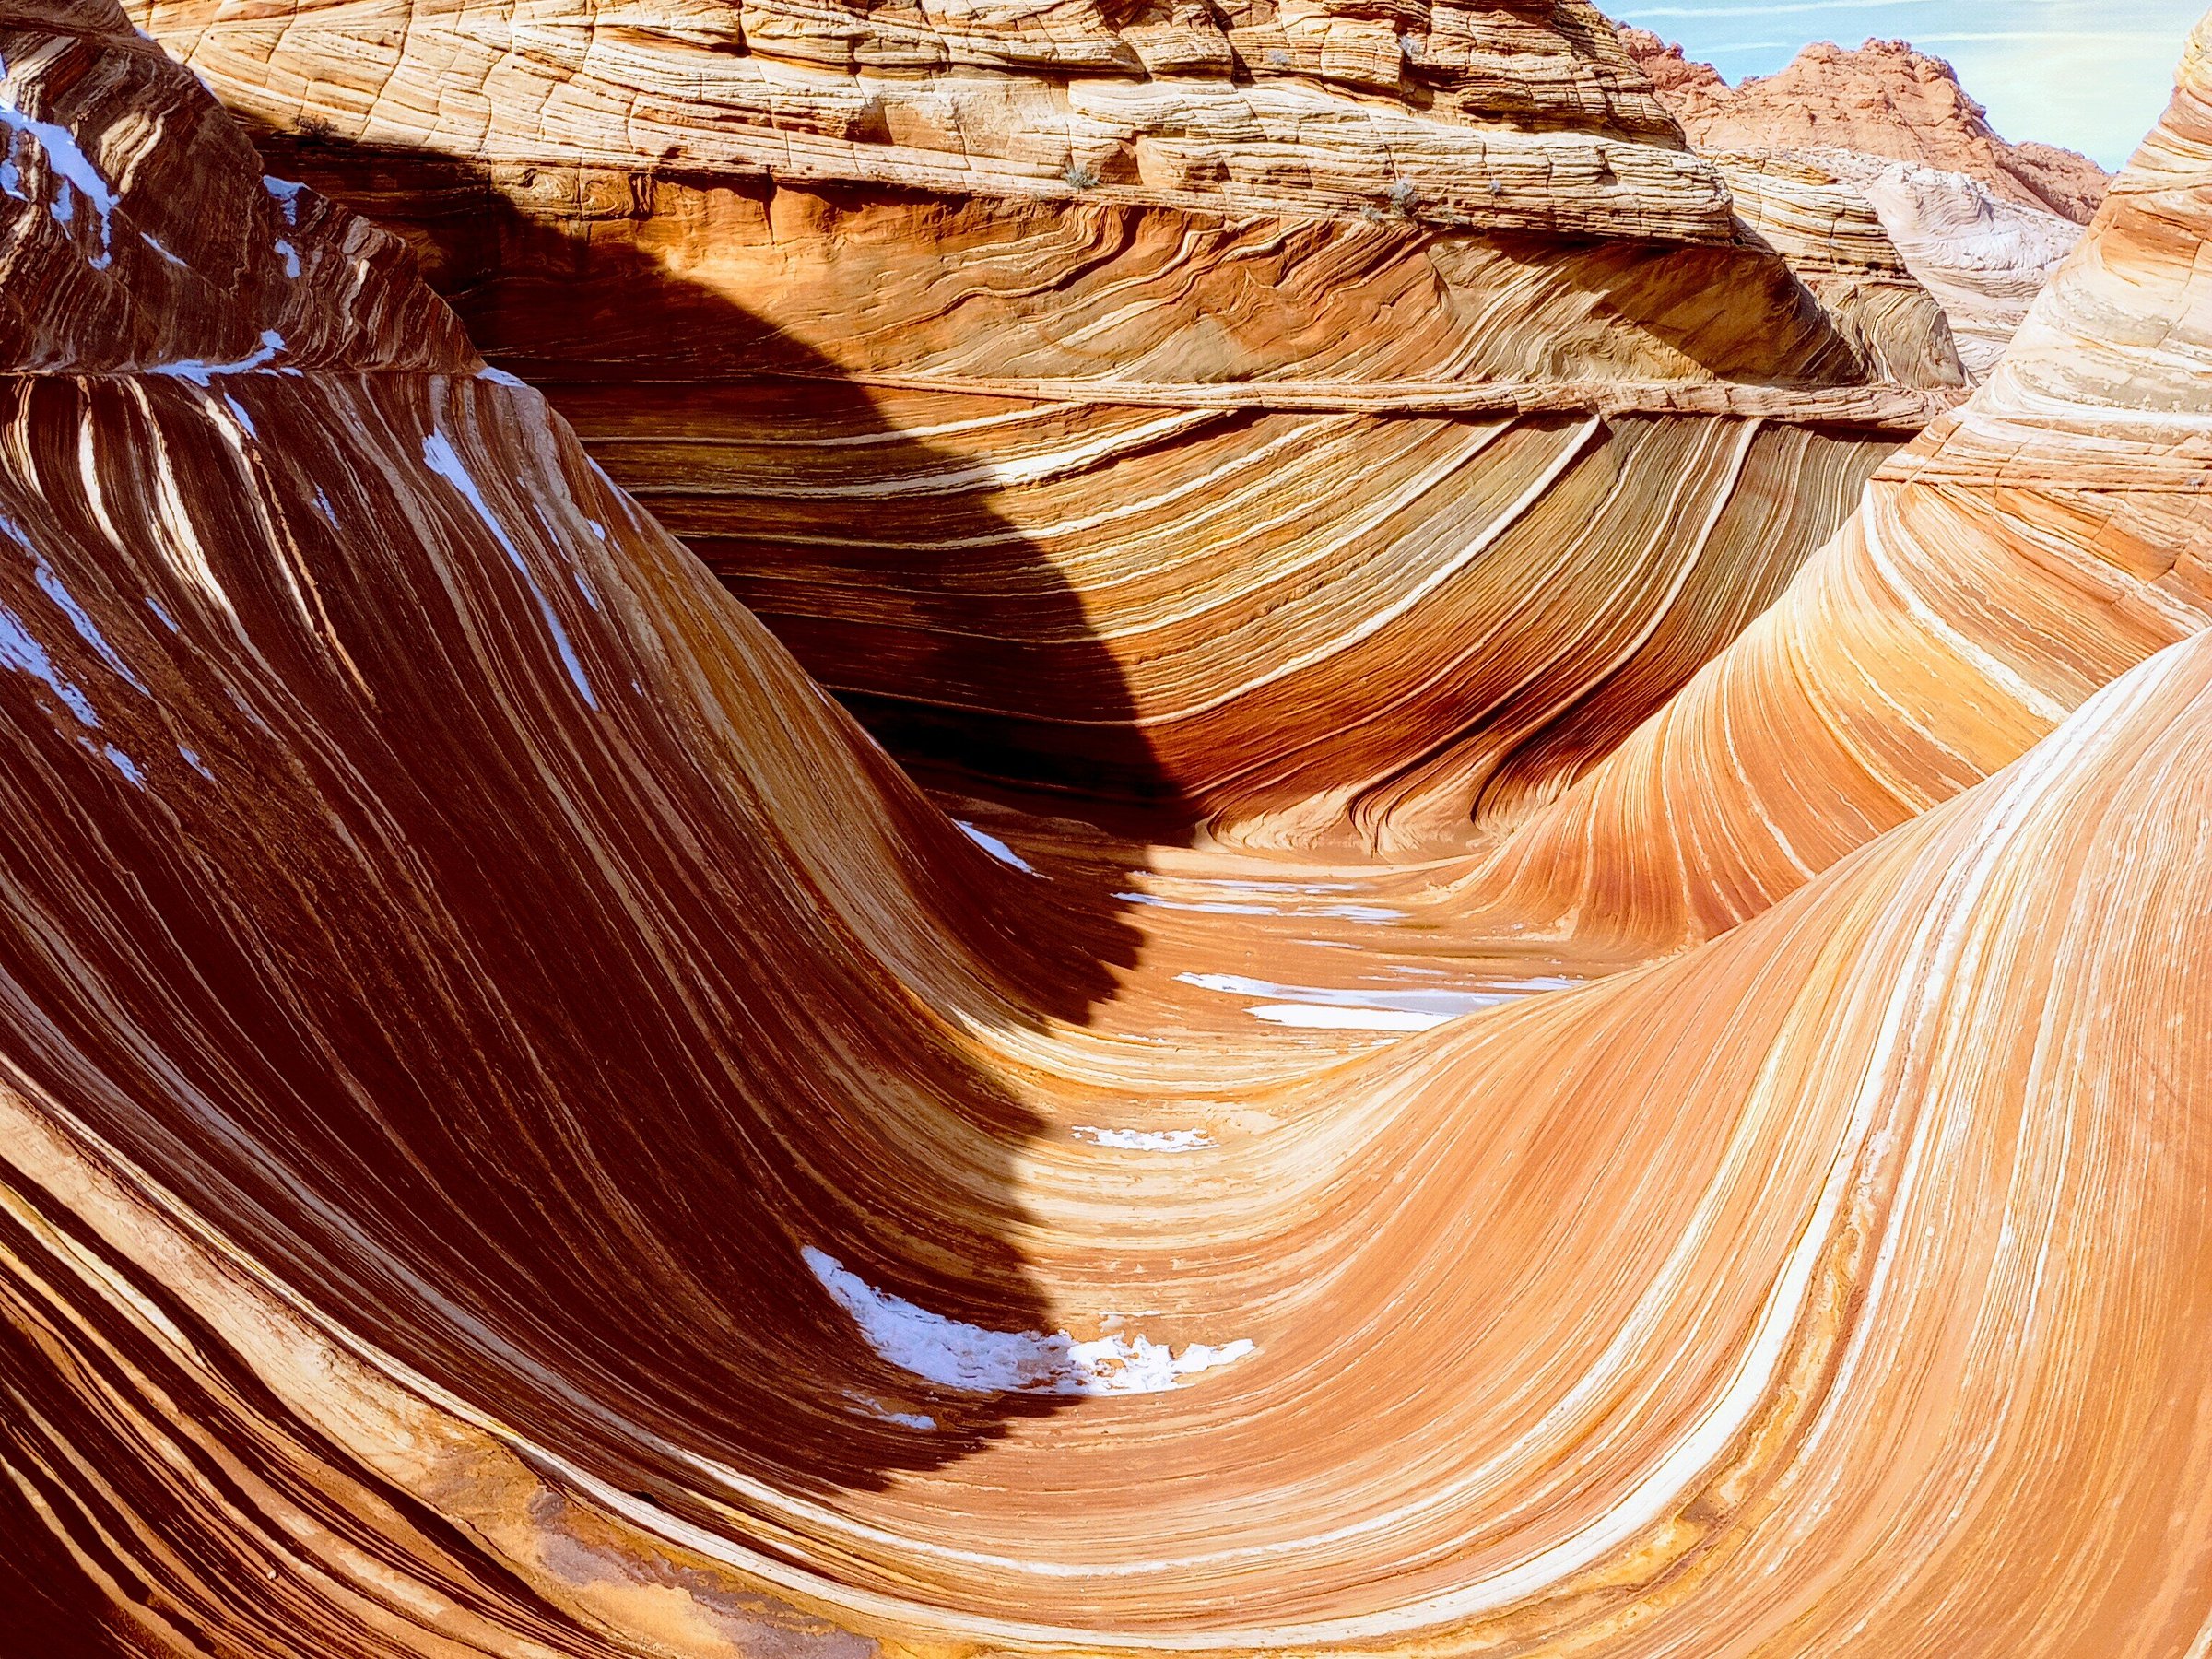 coral cliffs tours of kanab reviews